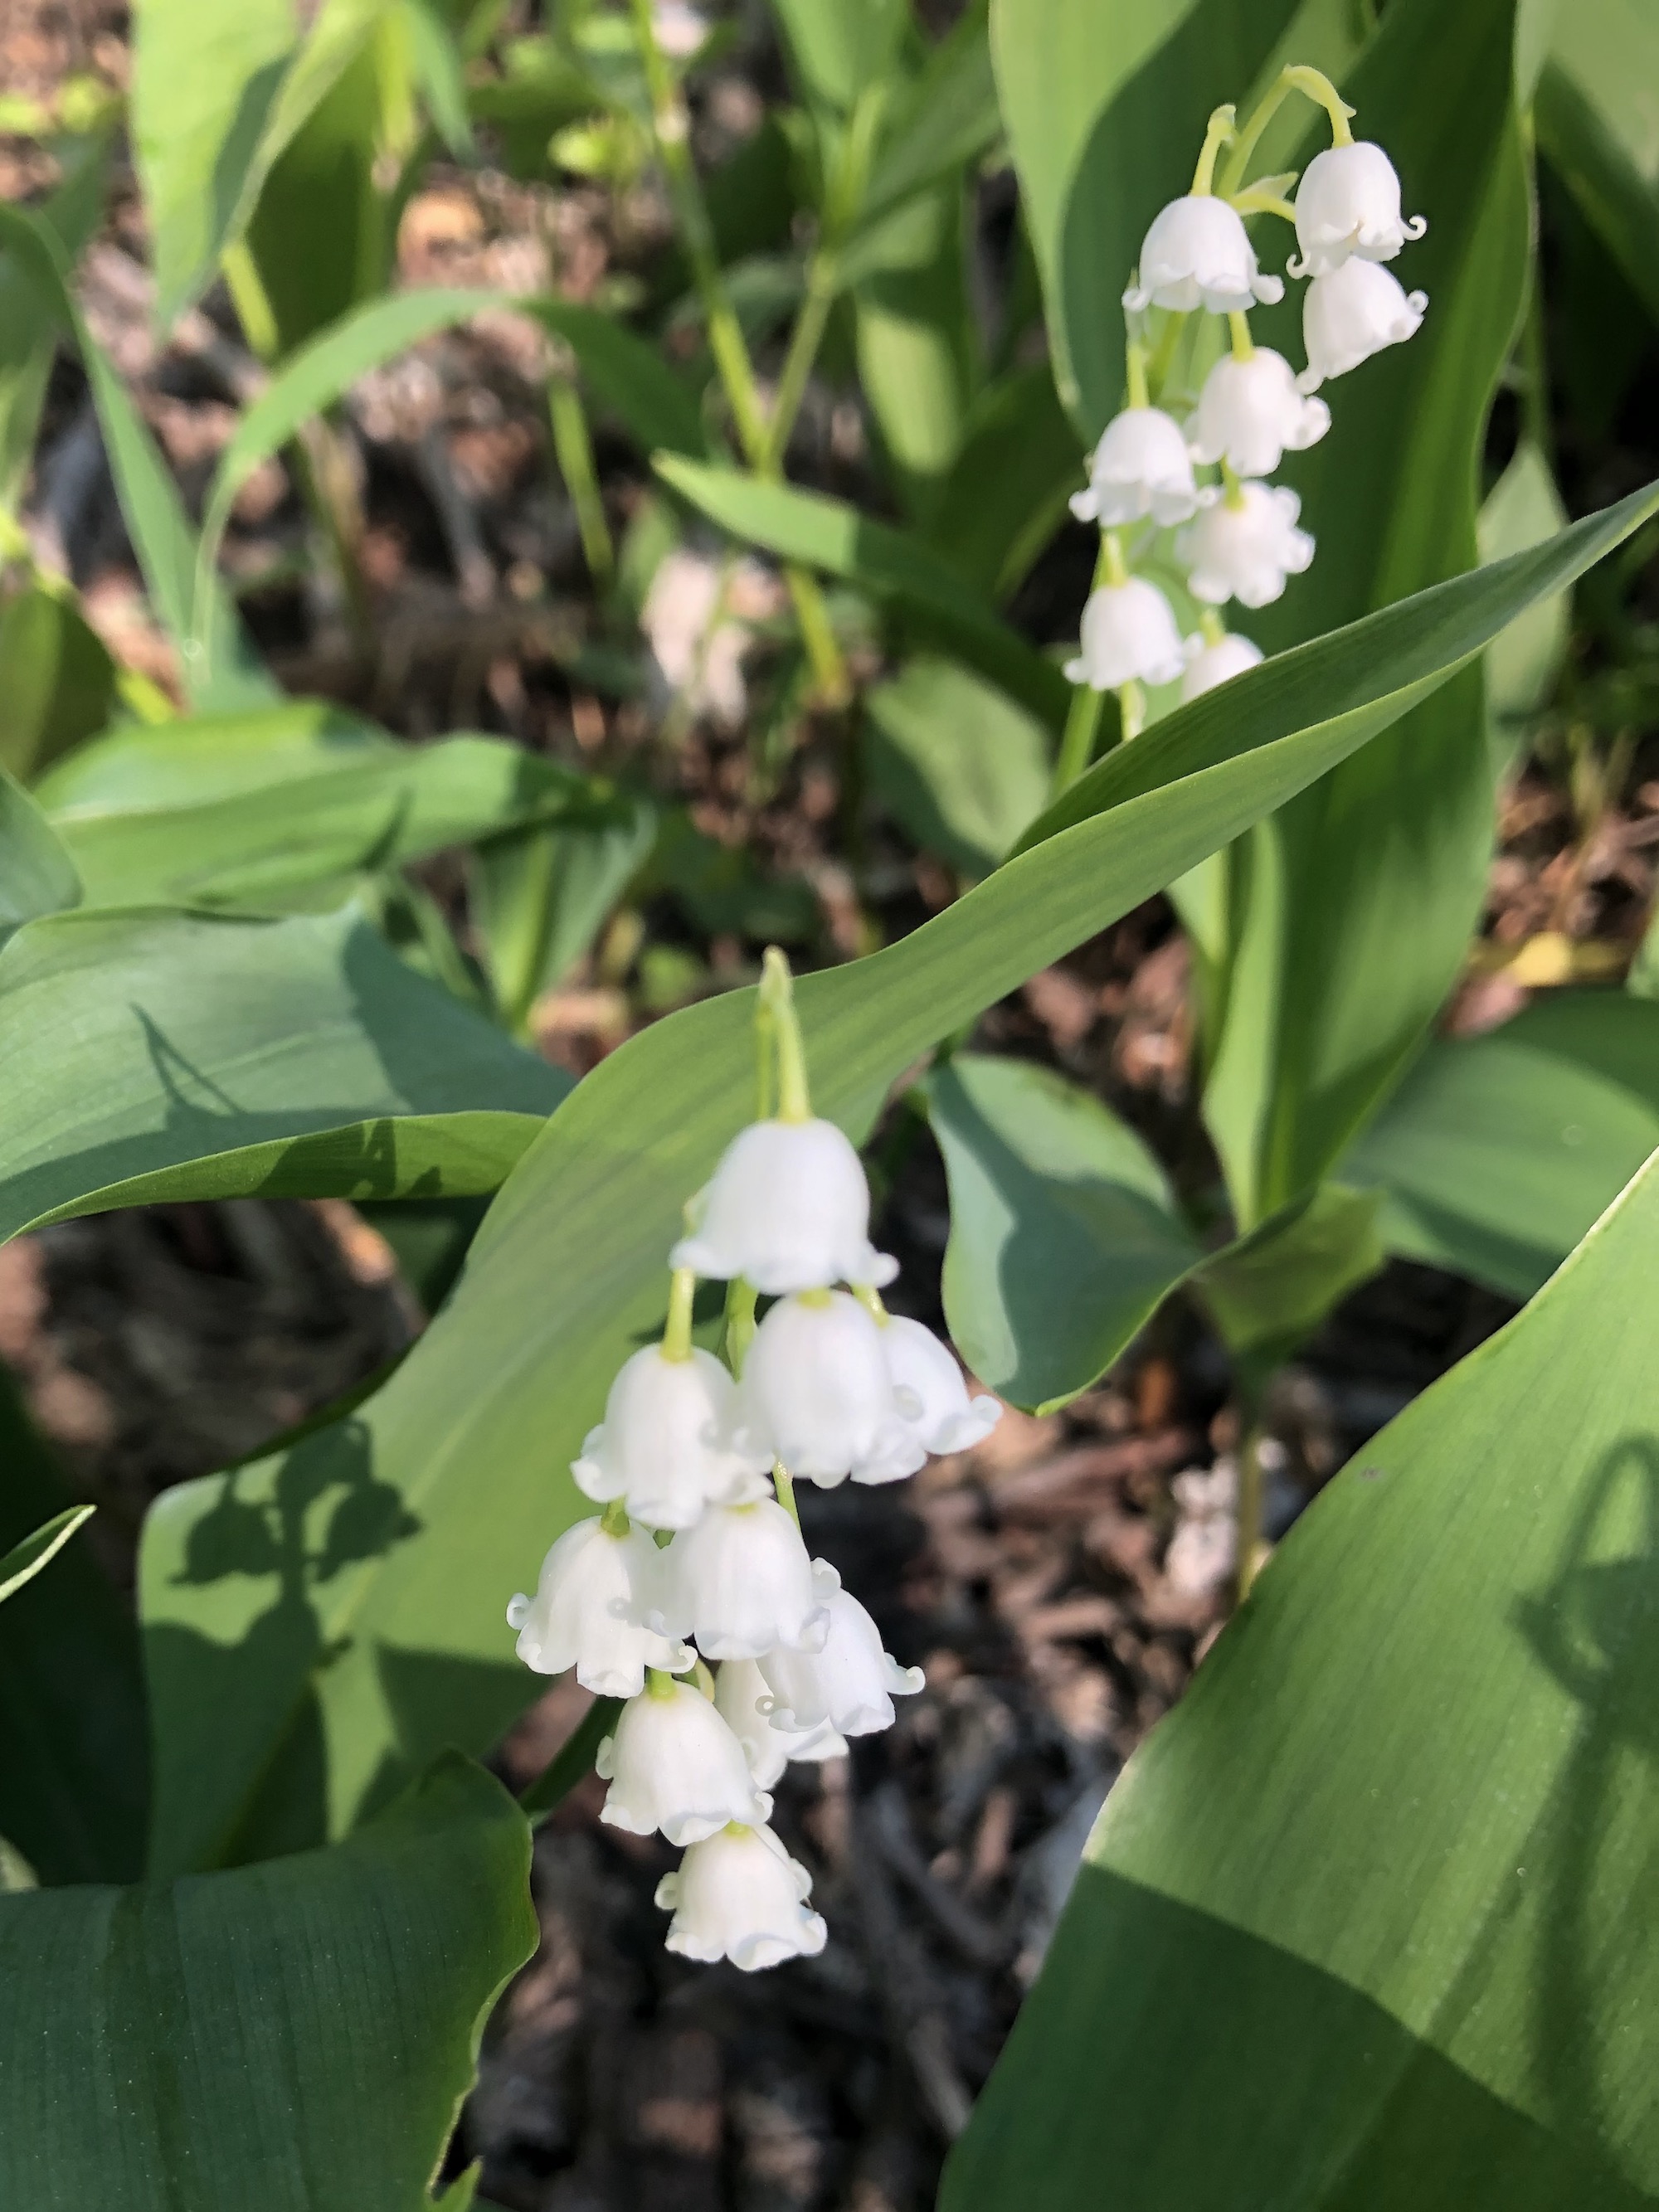 Lily of the Valley by Council Ring in Oak Savanna on May 11, 2021.